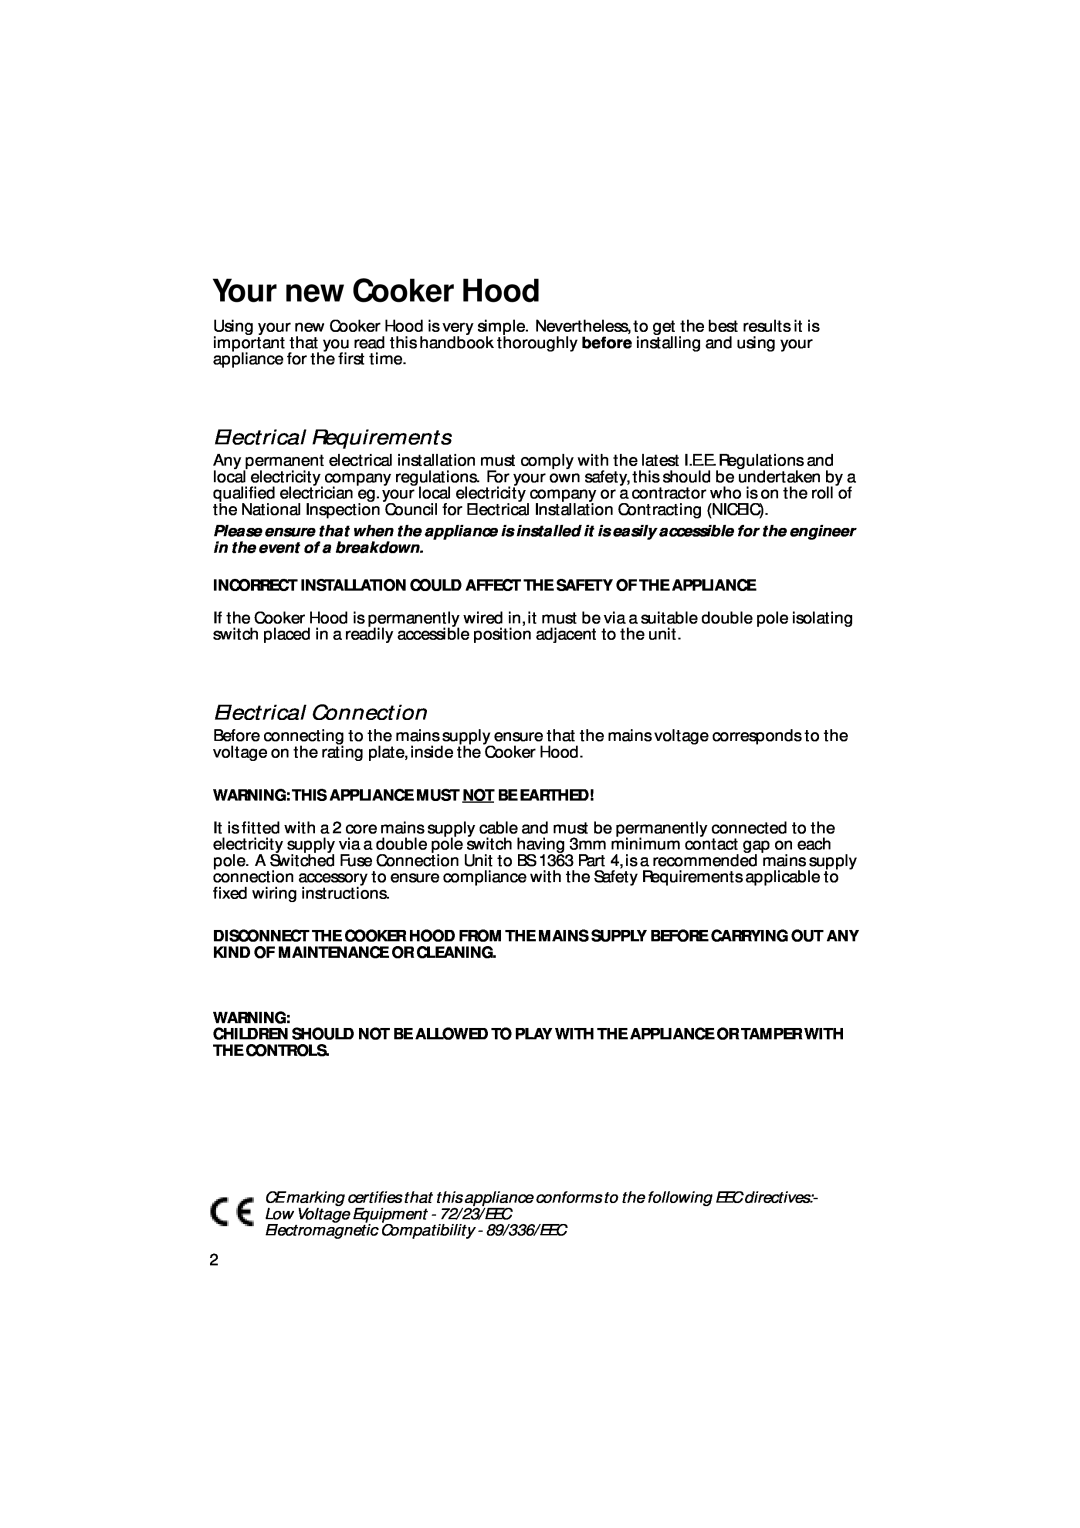 Creda CRC90, CRC65 manual Your new Cooker Hood, Electrical Requirements, Electrical Connection 